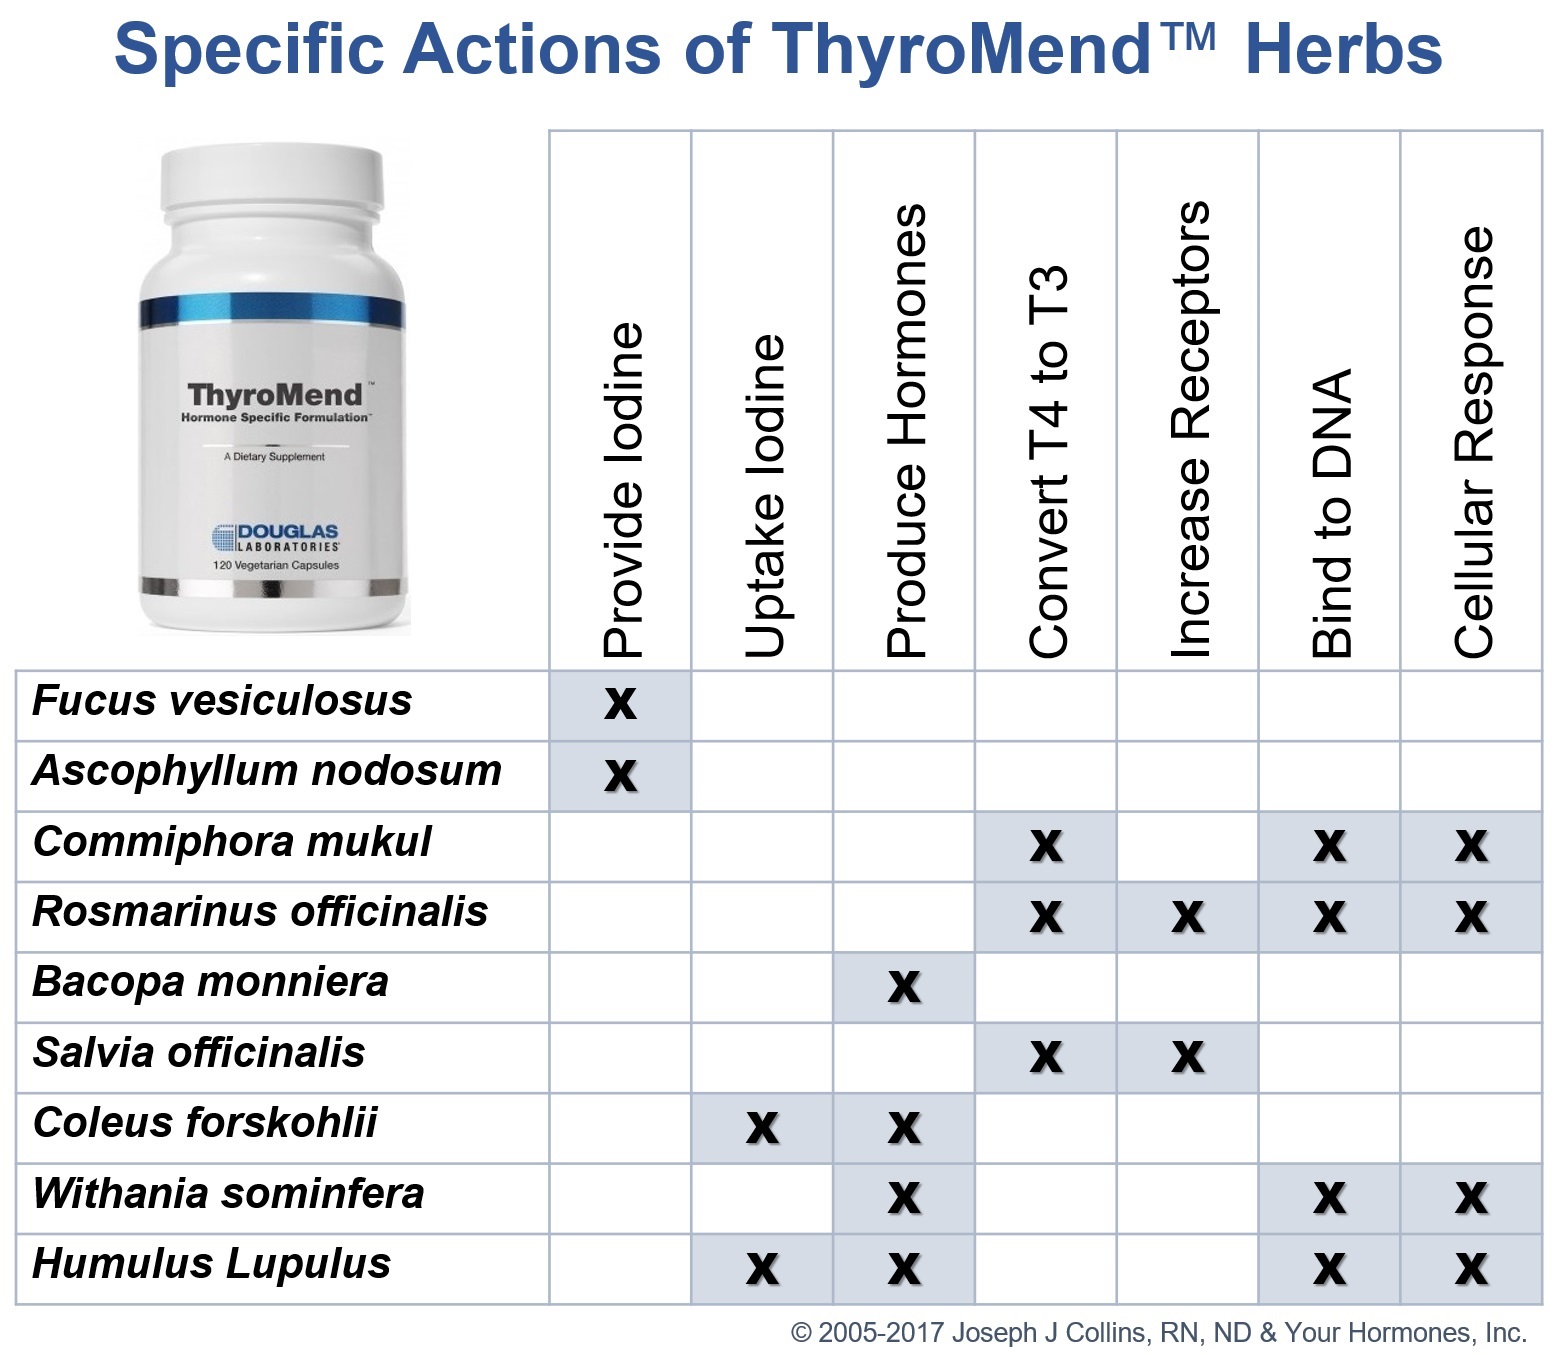 Specific Actions of Herbs in Thyromend™